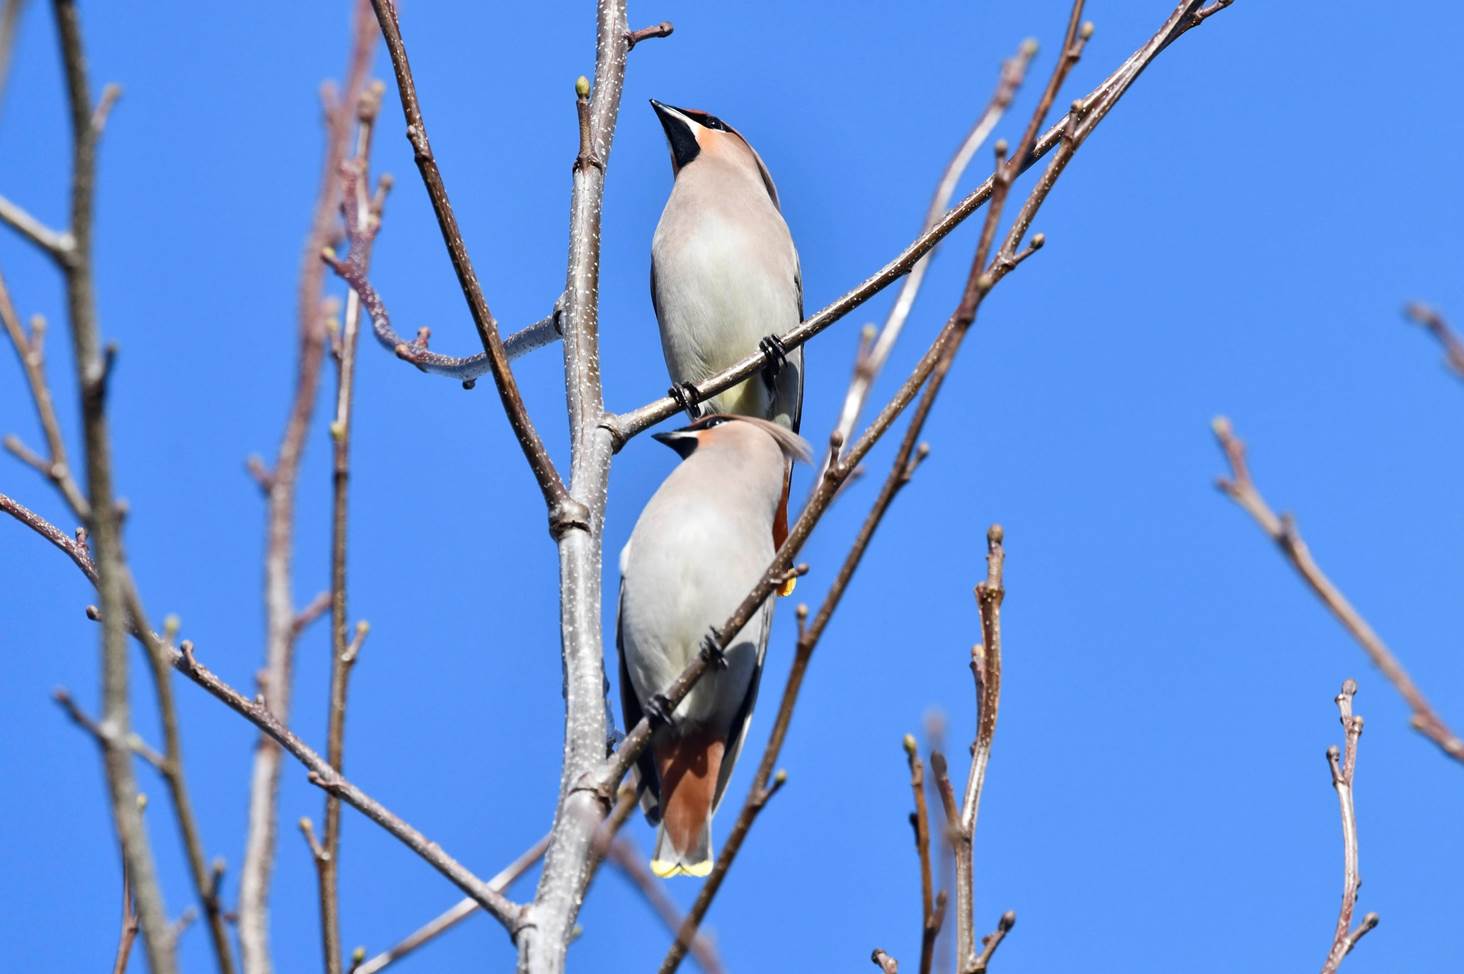 Two birds sitting on a tree branch

Description automatically generated